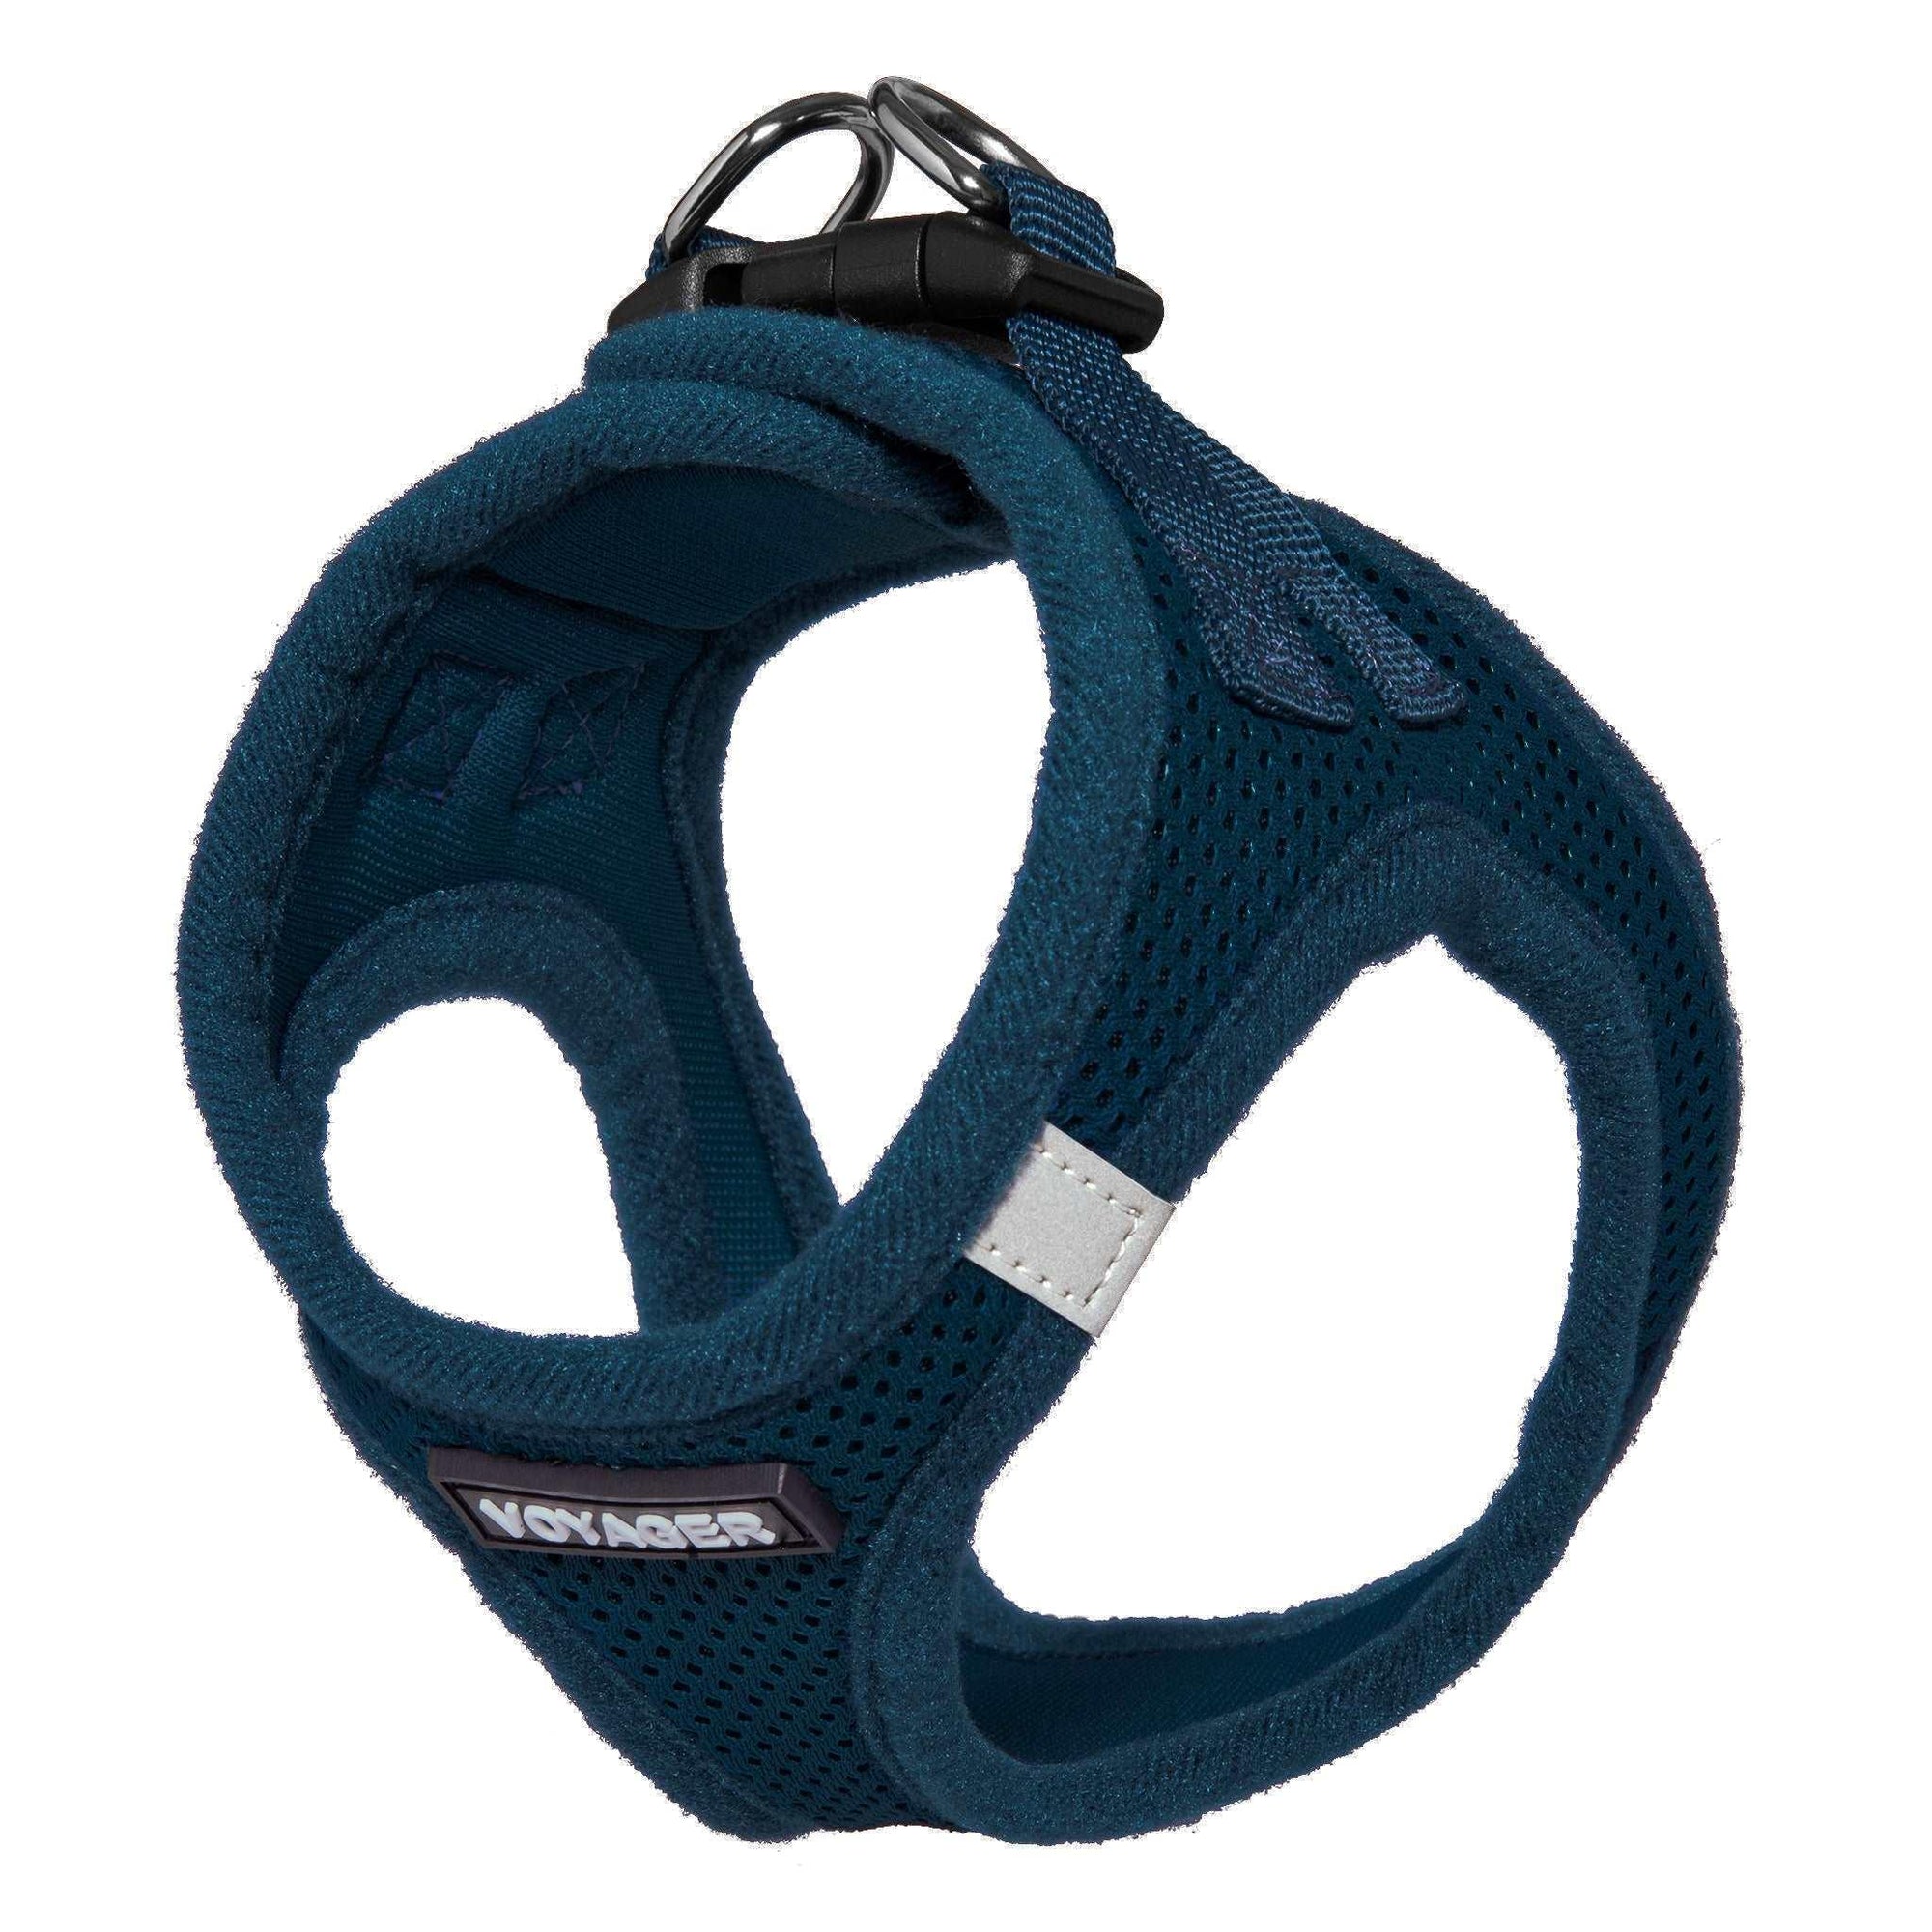 VOYAGER Step-In Air Pet Harness in Navy Blue with Matching Trim and Webbing - Front